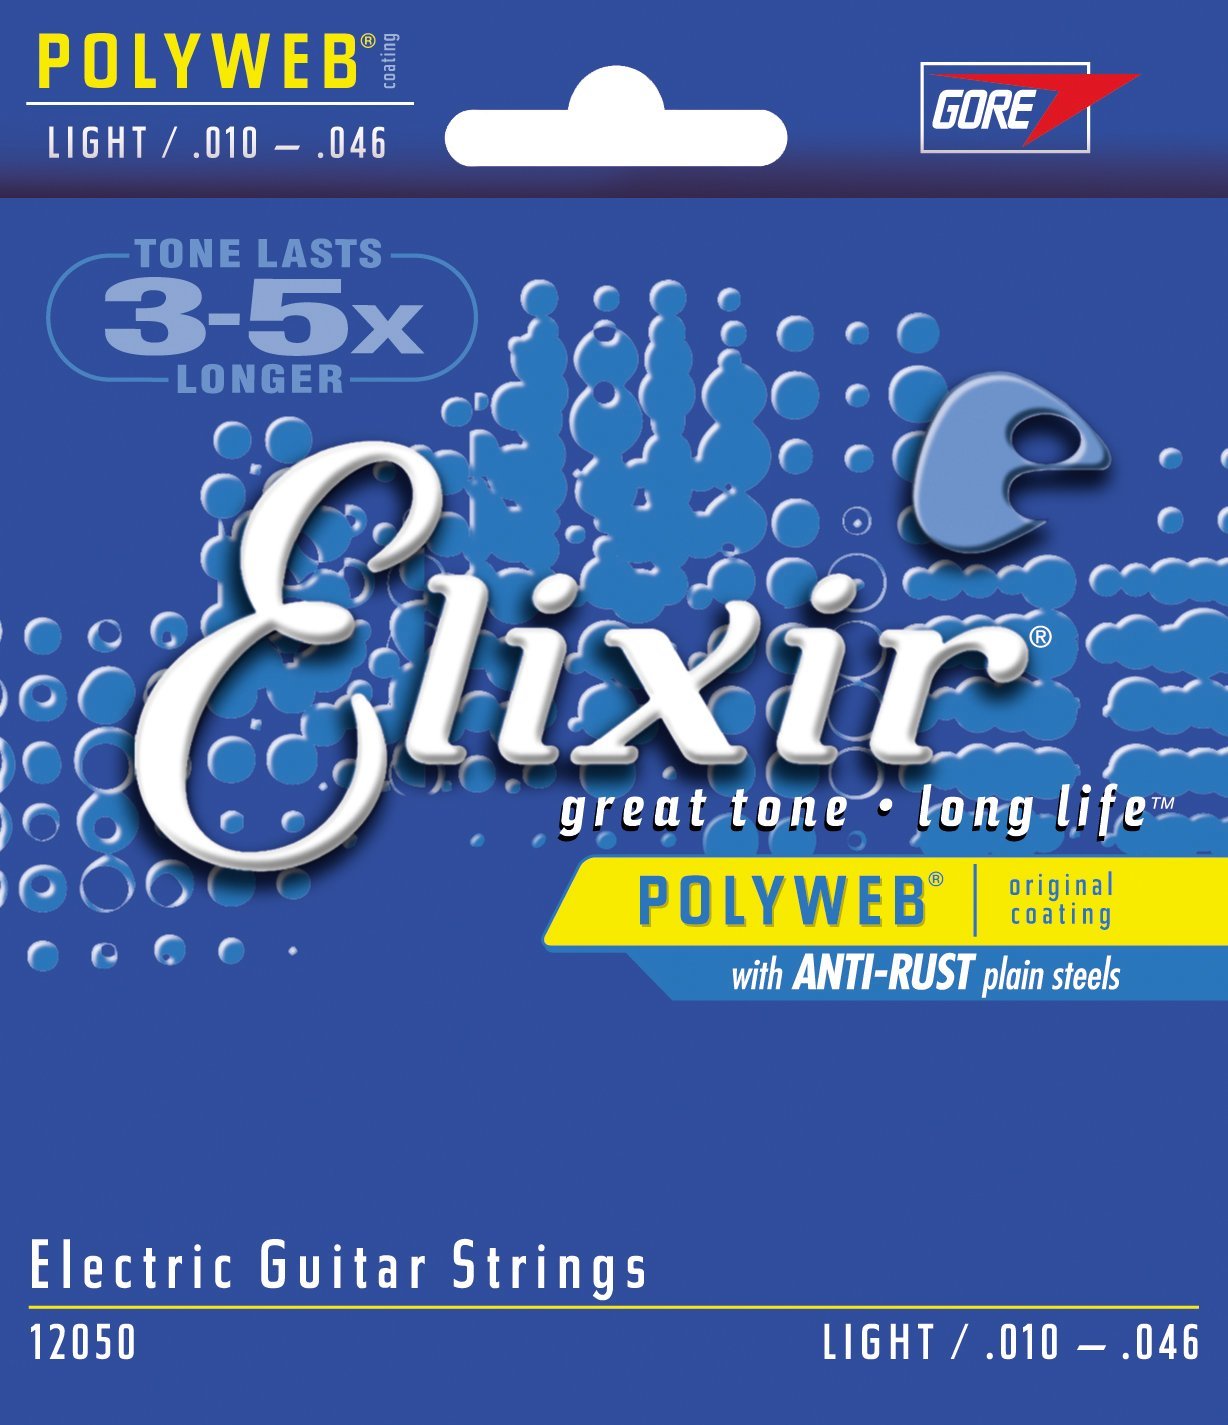 Elixir 12050 Electric Guitar Strings with POLYWEB Coating, Light (.010-.046)